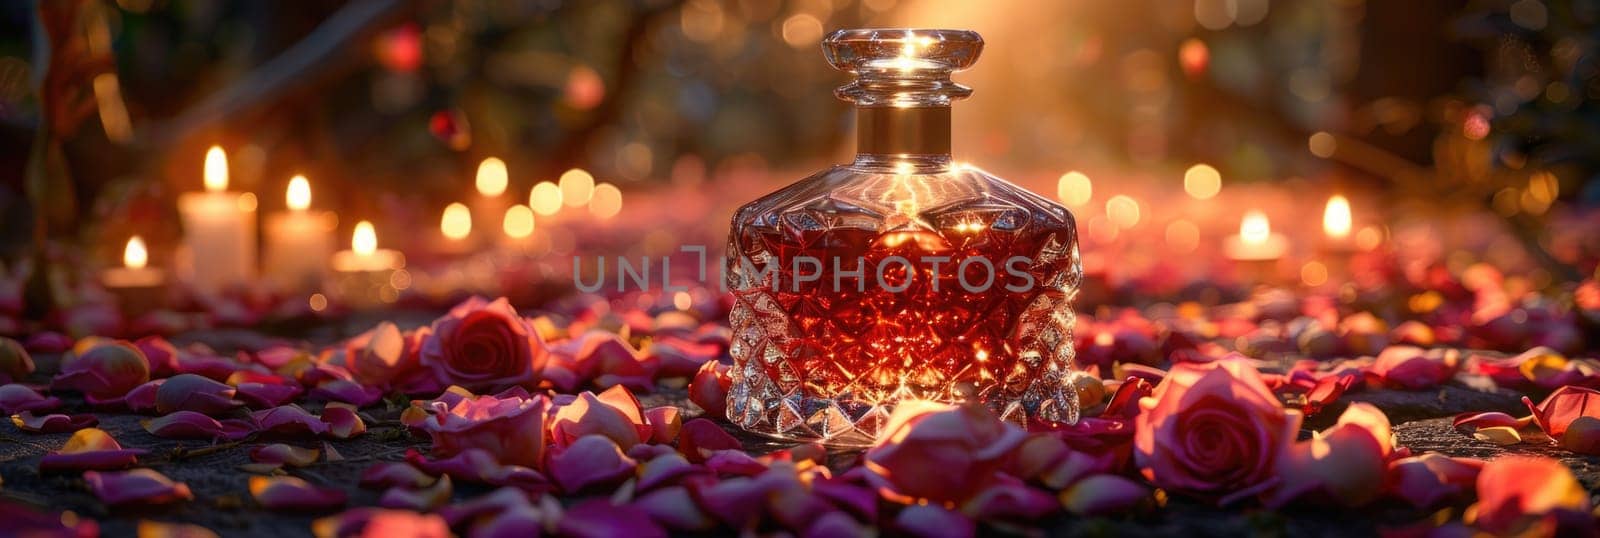 A vintage glass decanter filled with red liquid placed on a bed of colorful flowers in bloom.